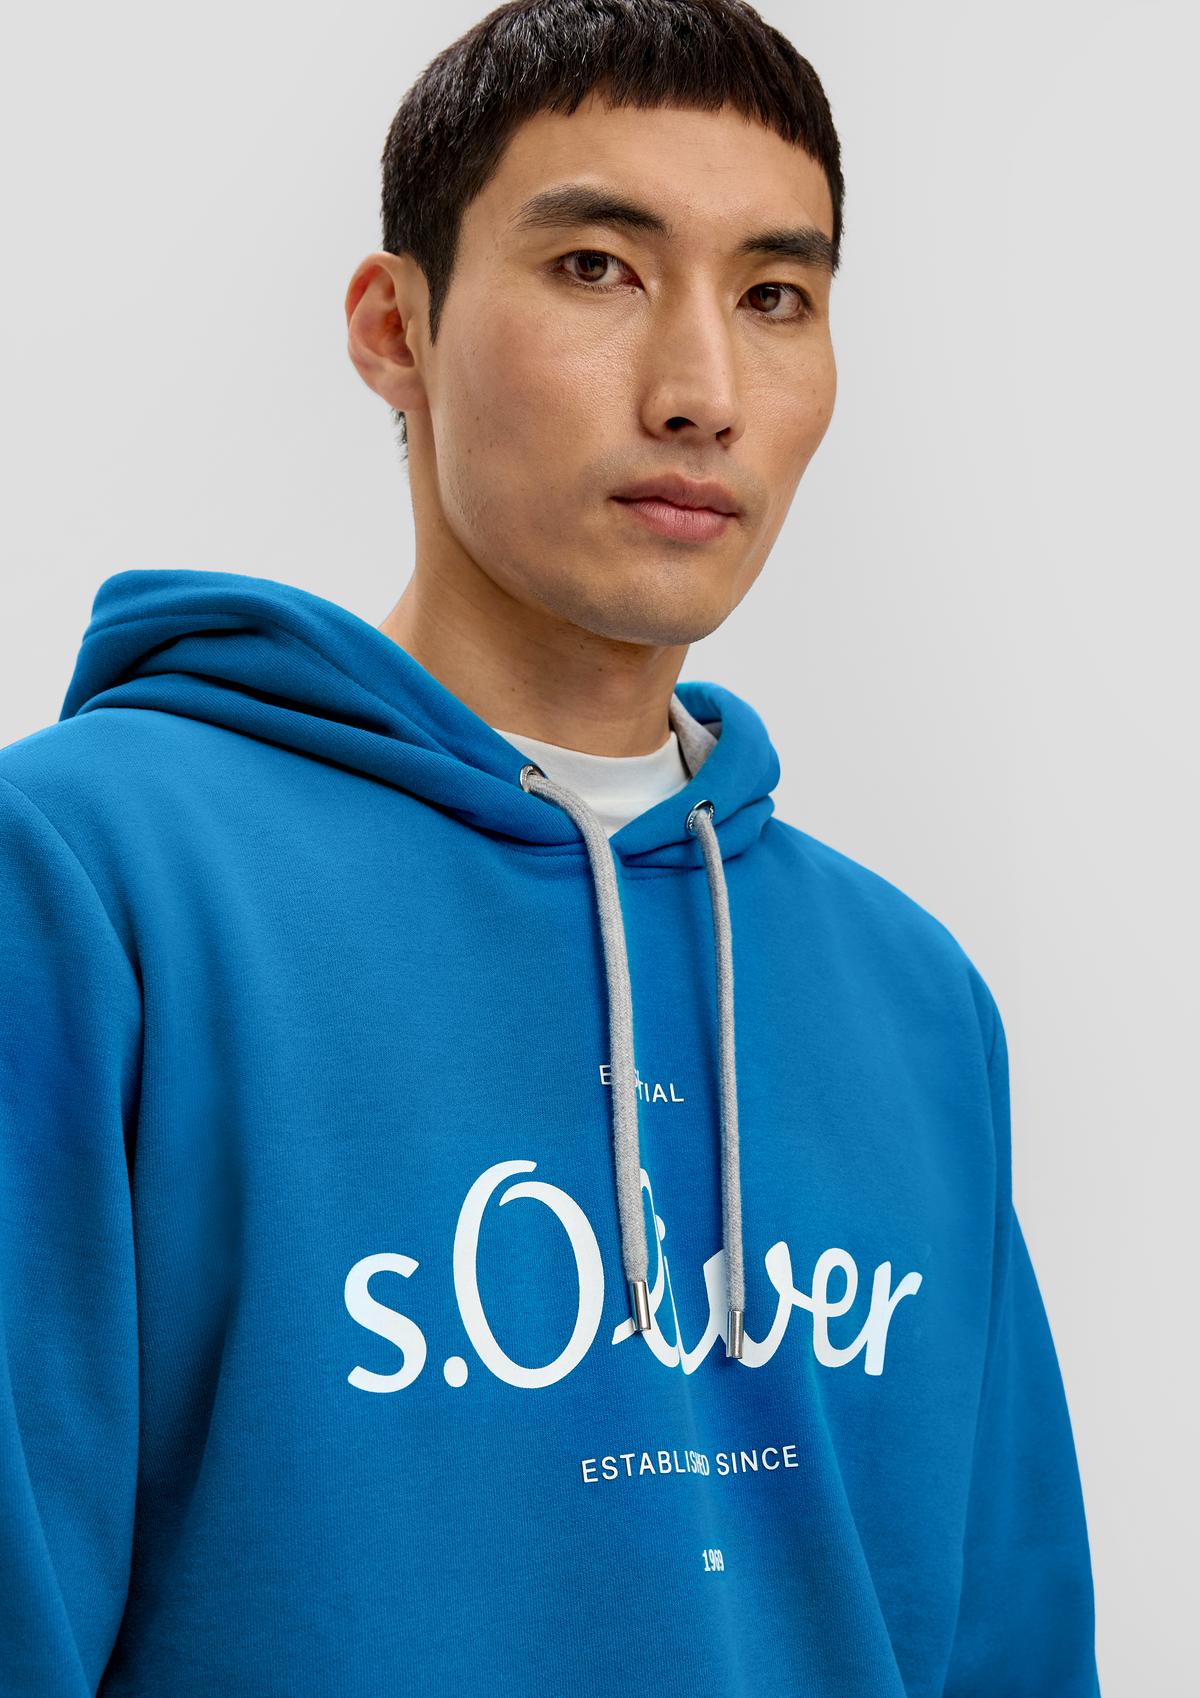 s.Oliver Sweatshirt with a rubberised logo print